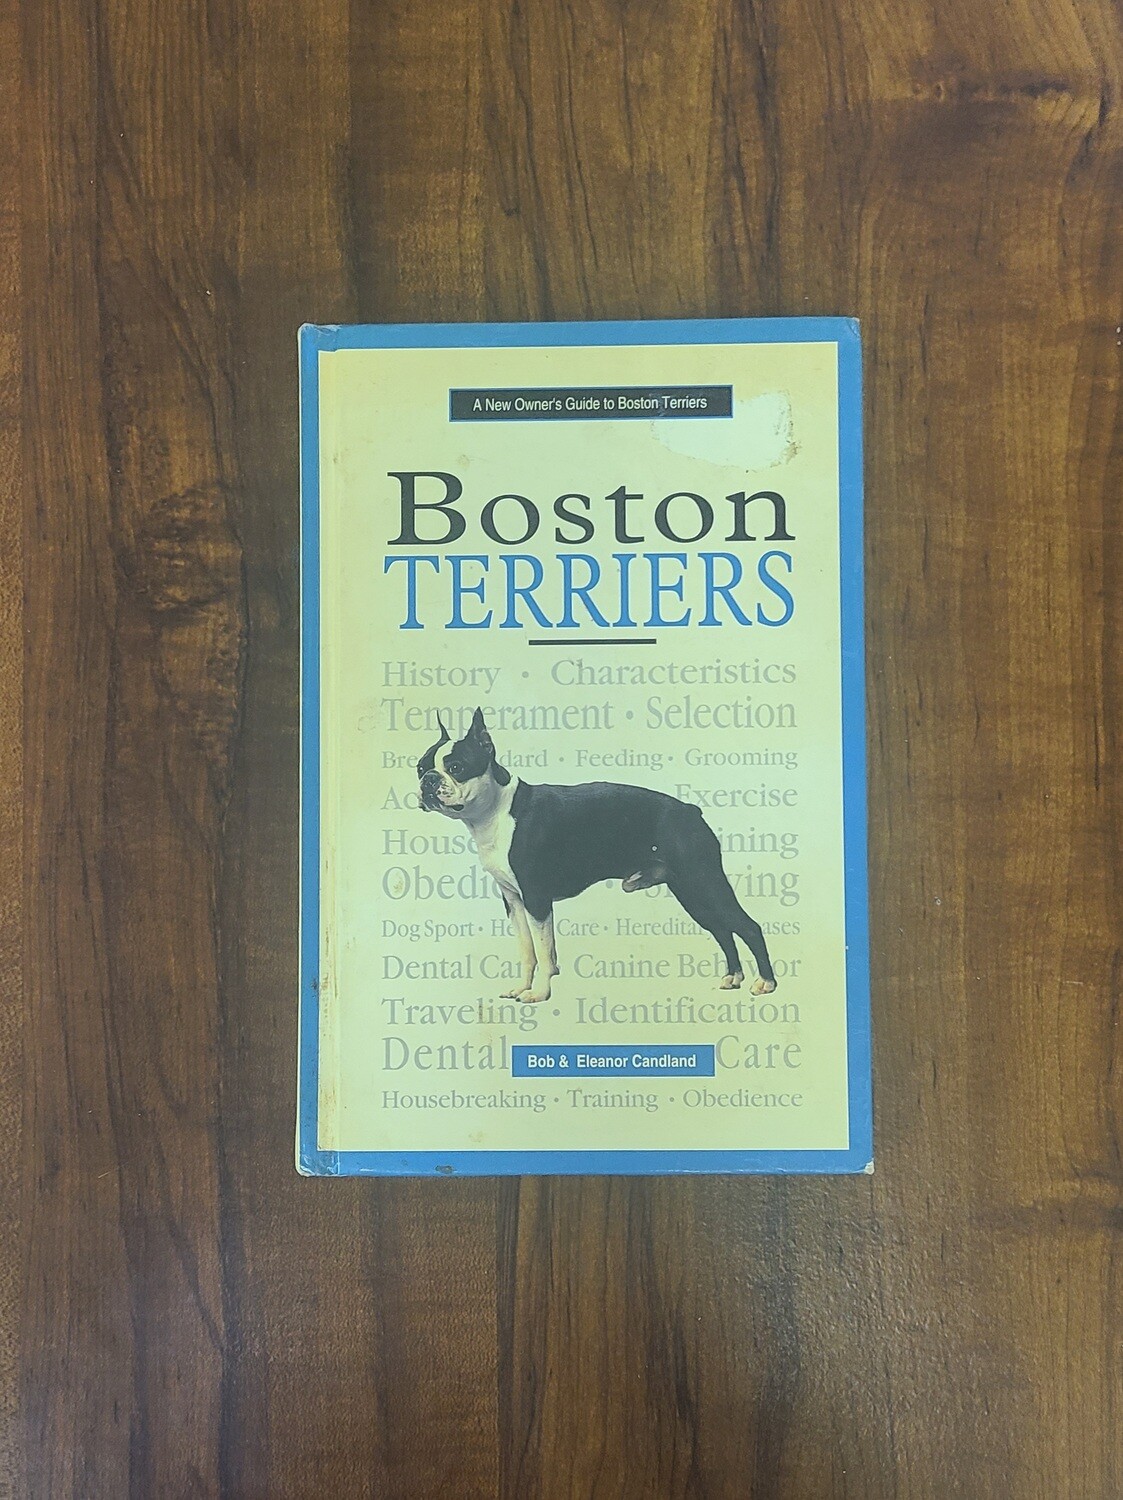 A New Owner's Guide to Boston Terriers by Bob and Eleanor Candland